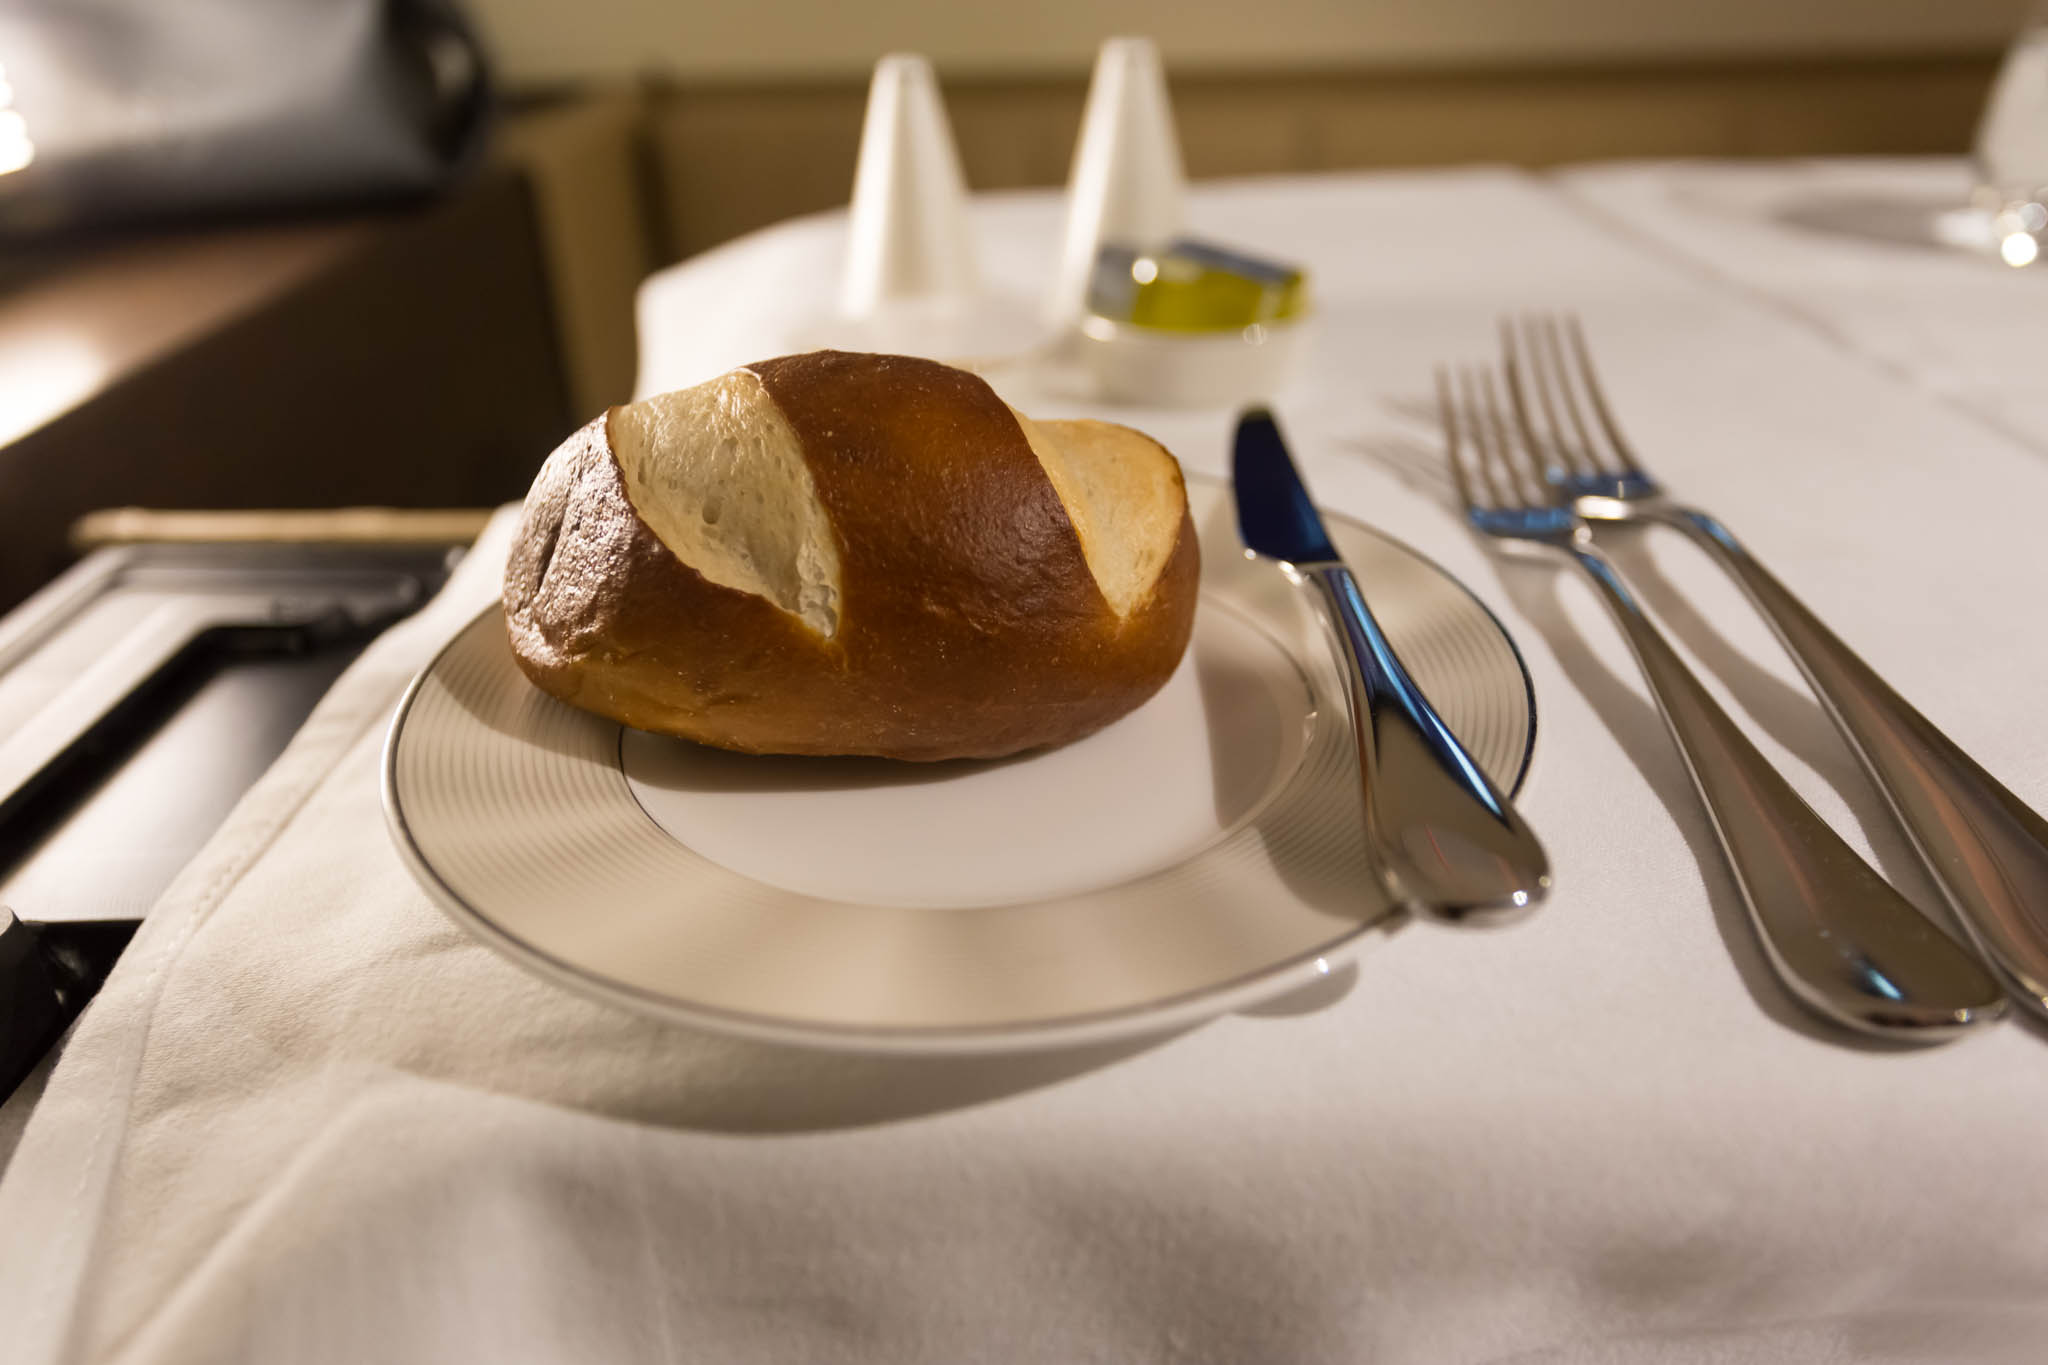 a piece of bread on a plate with a fork and knife